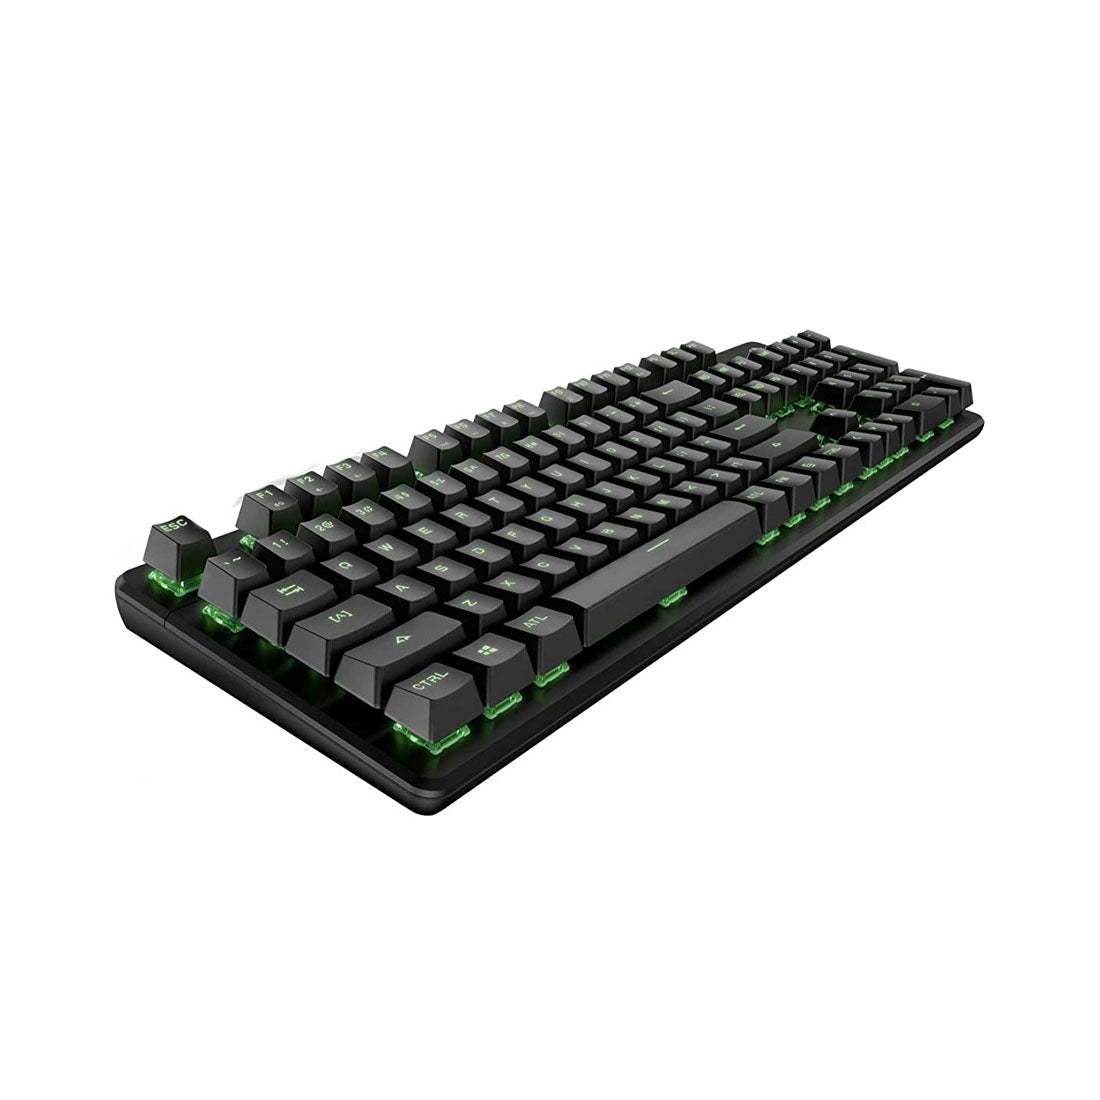 HP Pavilion Wired Mechanical RGB Gaming Keyboard 500 with LED Backlighting